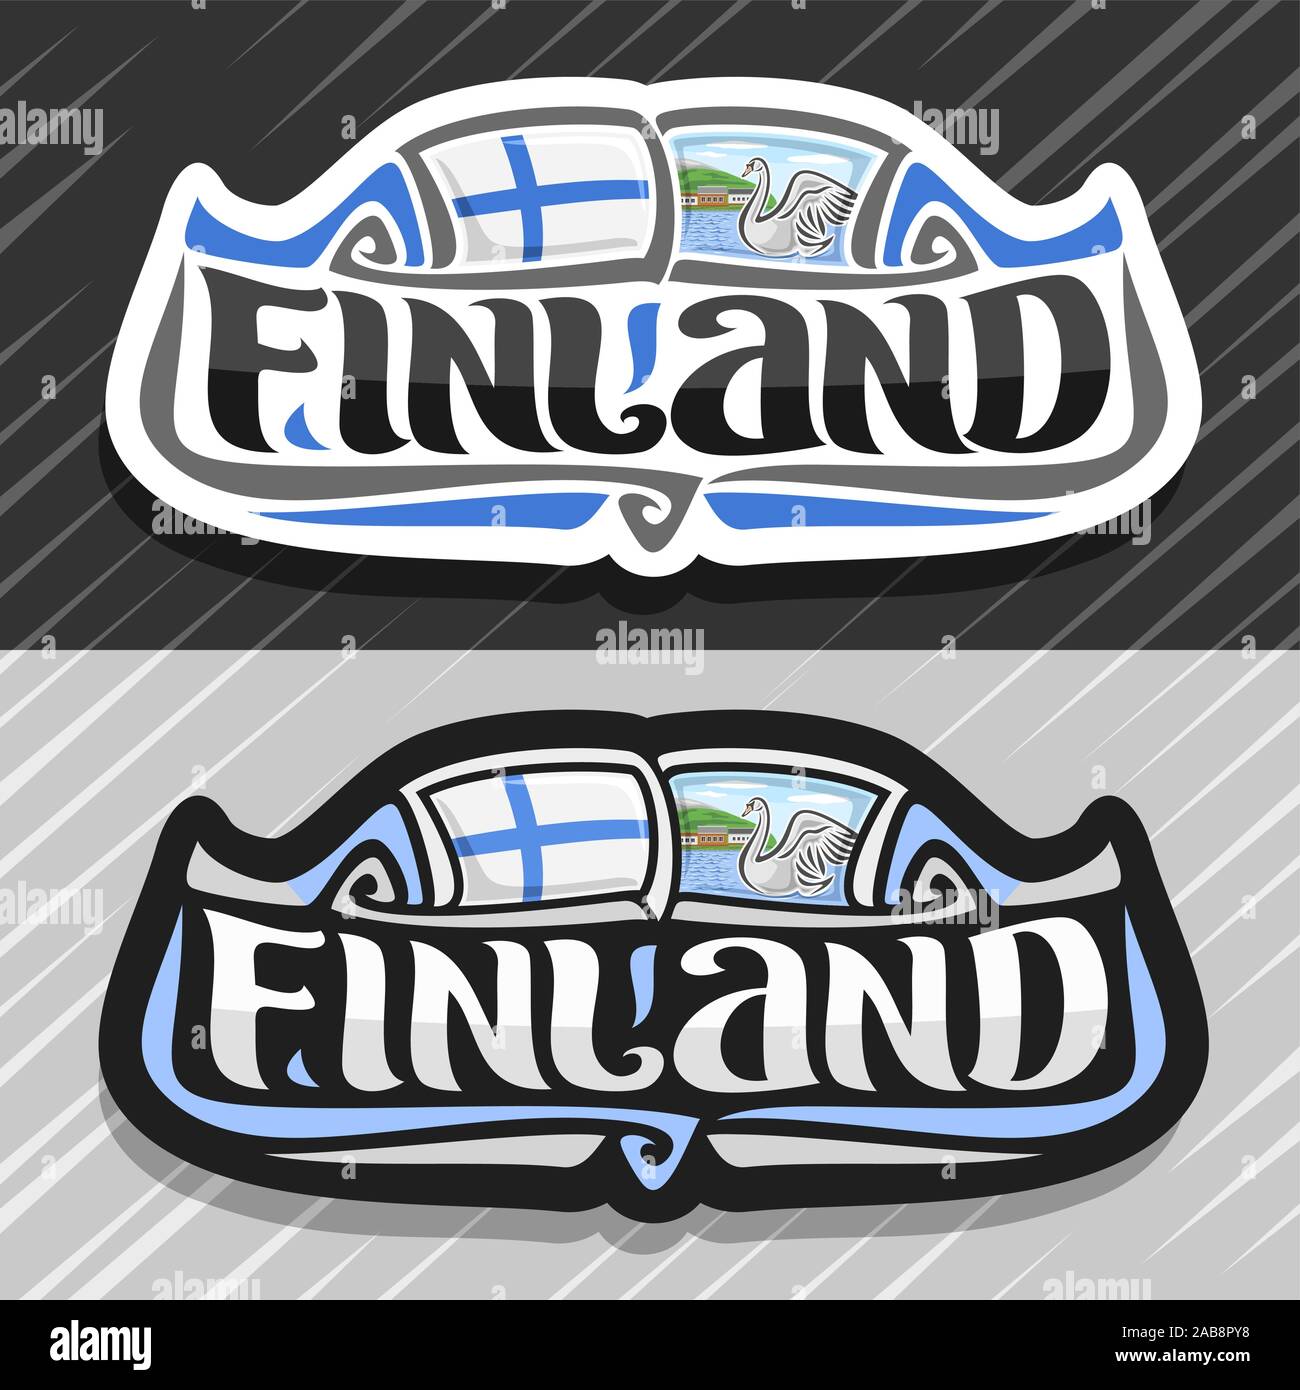 Vector logo for Finland country, fridge magnet with finnish flag, original brush typeface for word finland and finnish symbol - white swan in lake of Stock Vector